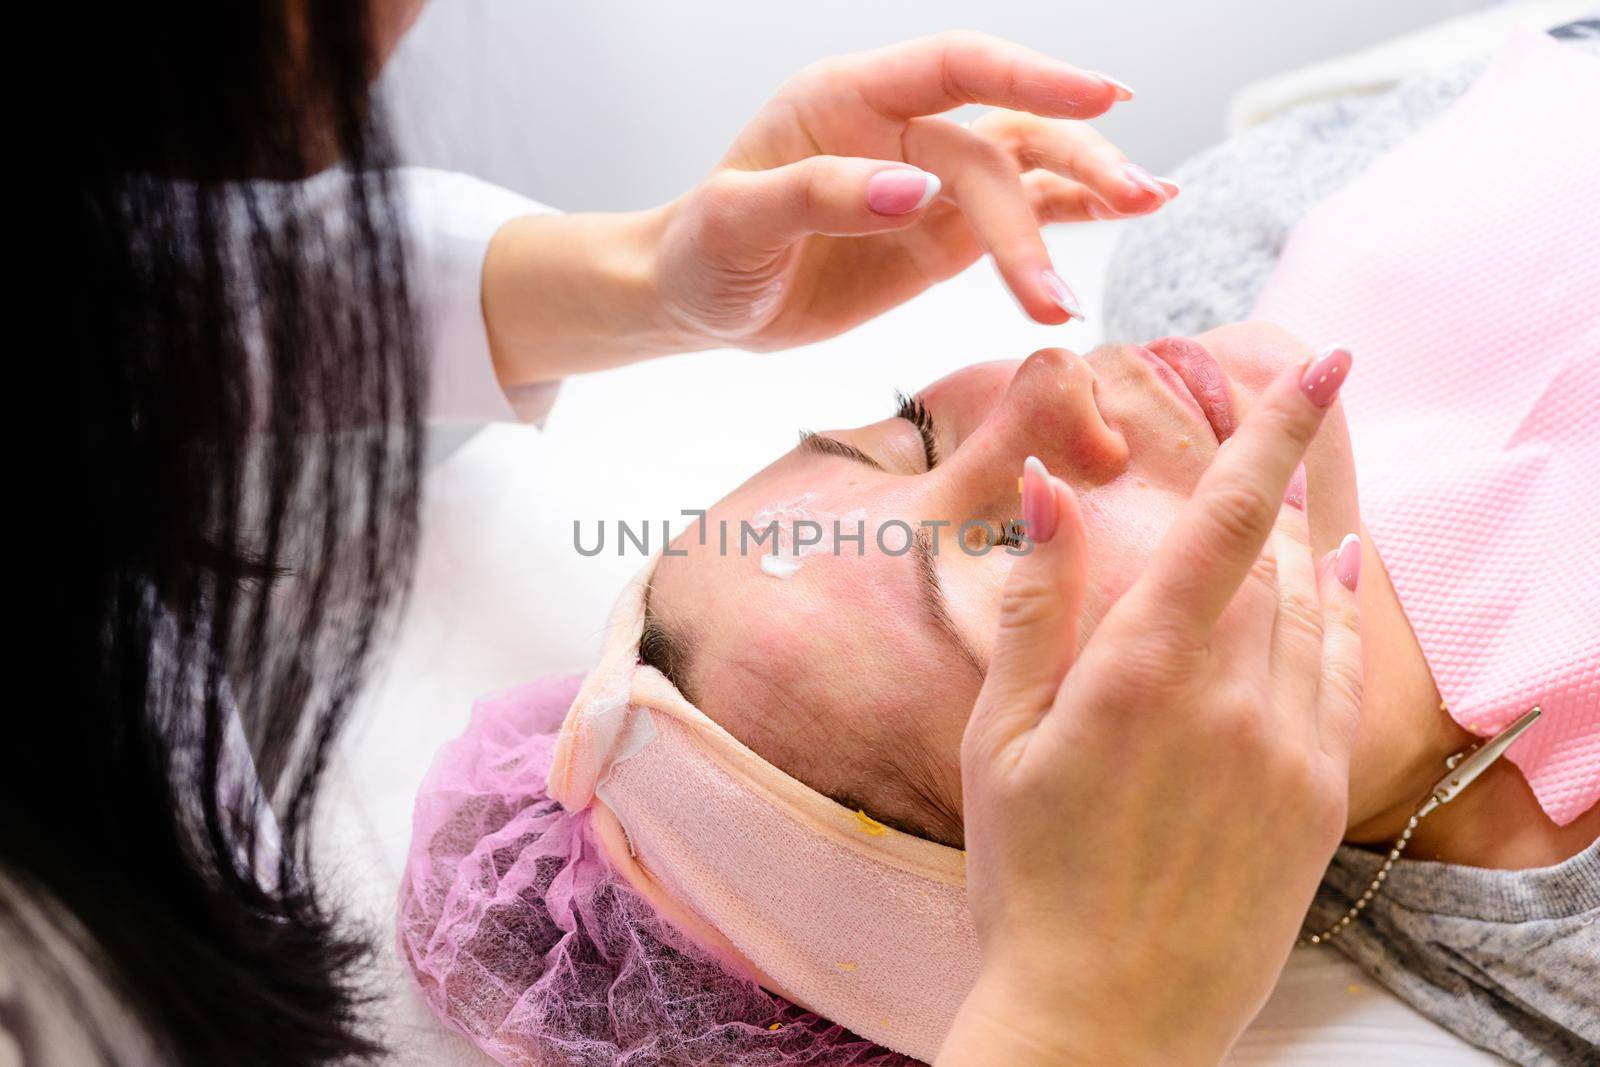 Facial massage at the beautician at the reception, visiting a beauty salon, a sense of relaxation. new